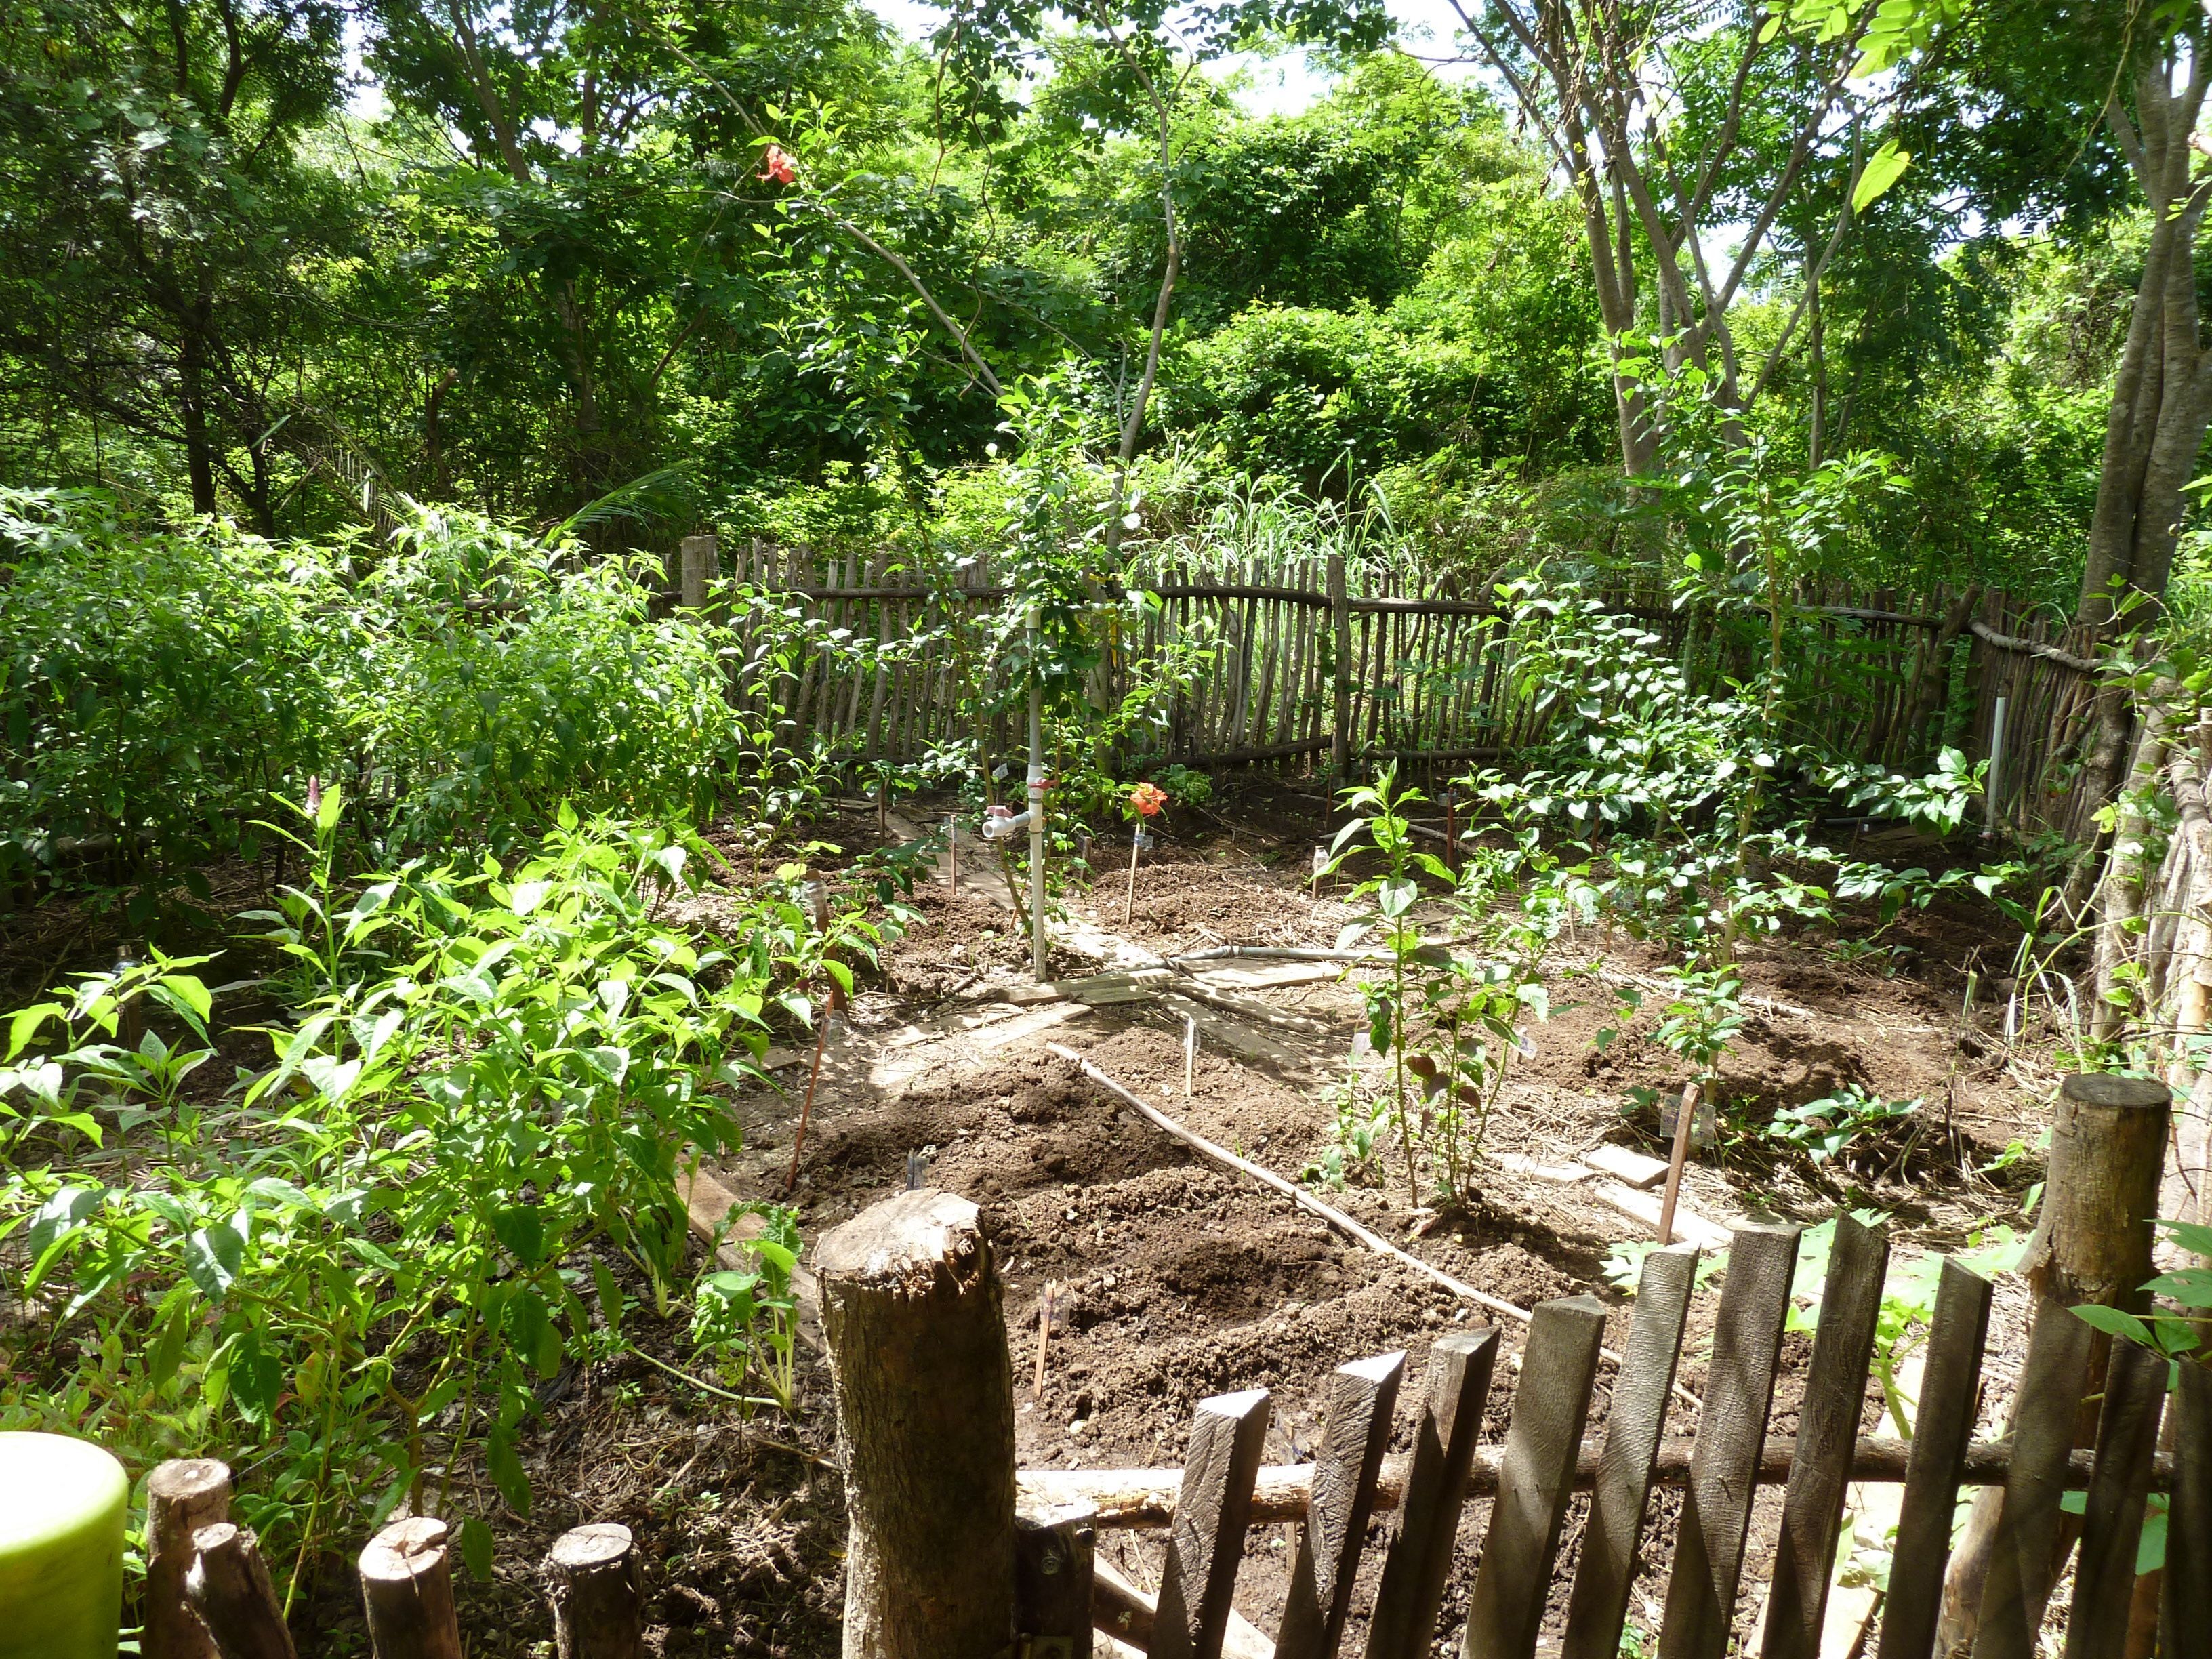 The Orchard Food Forest Garden